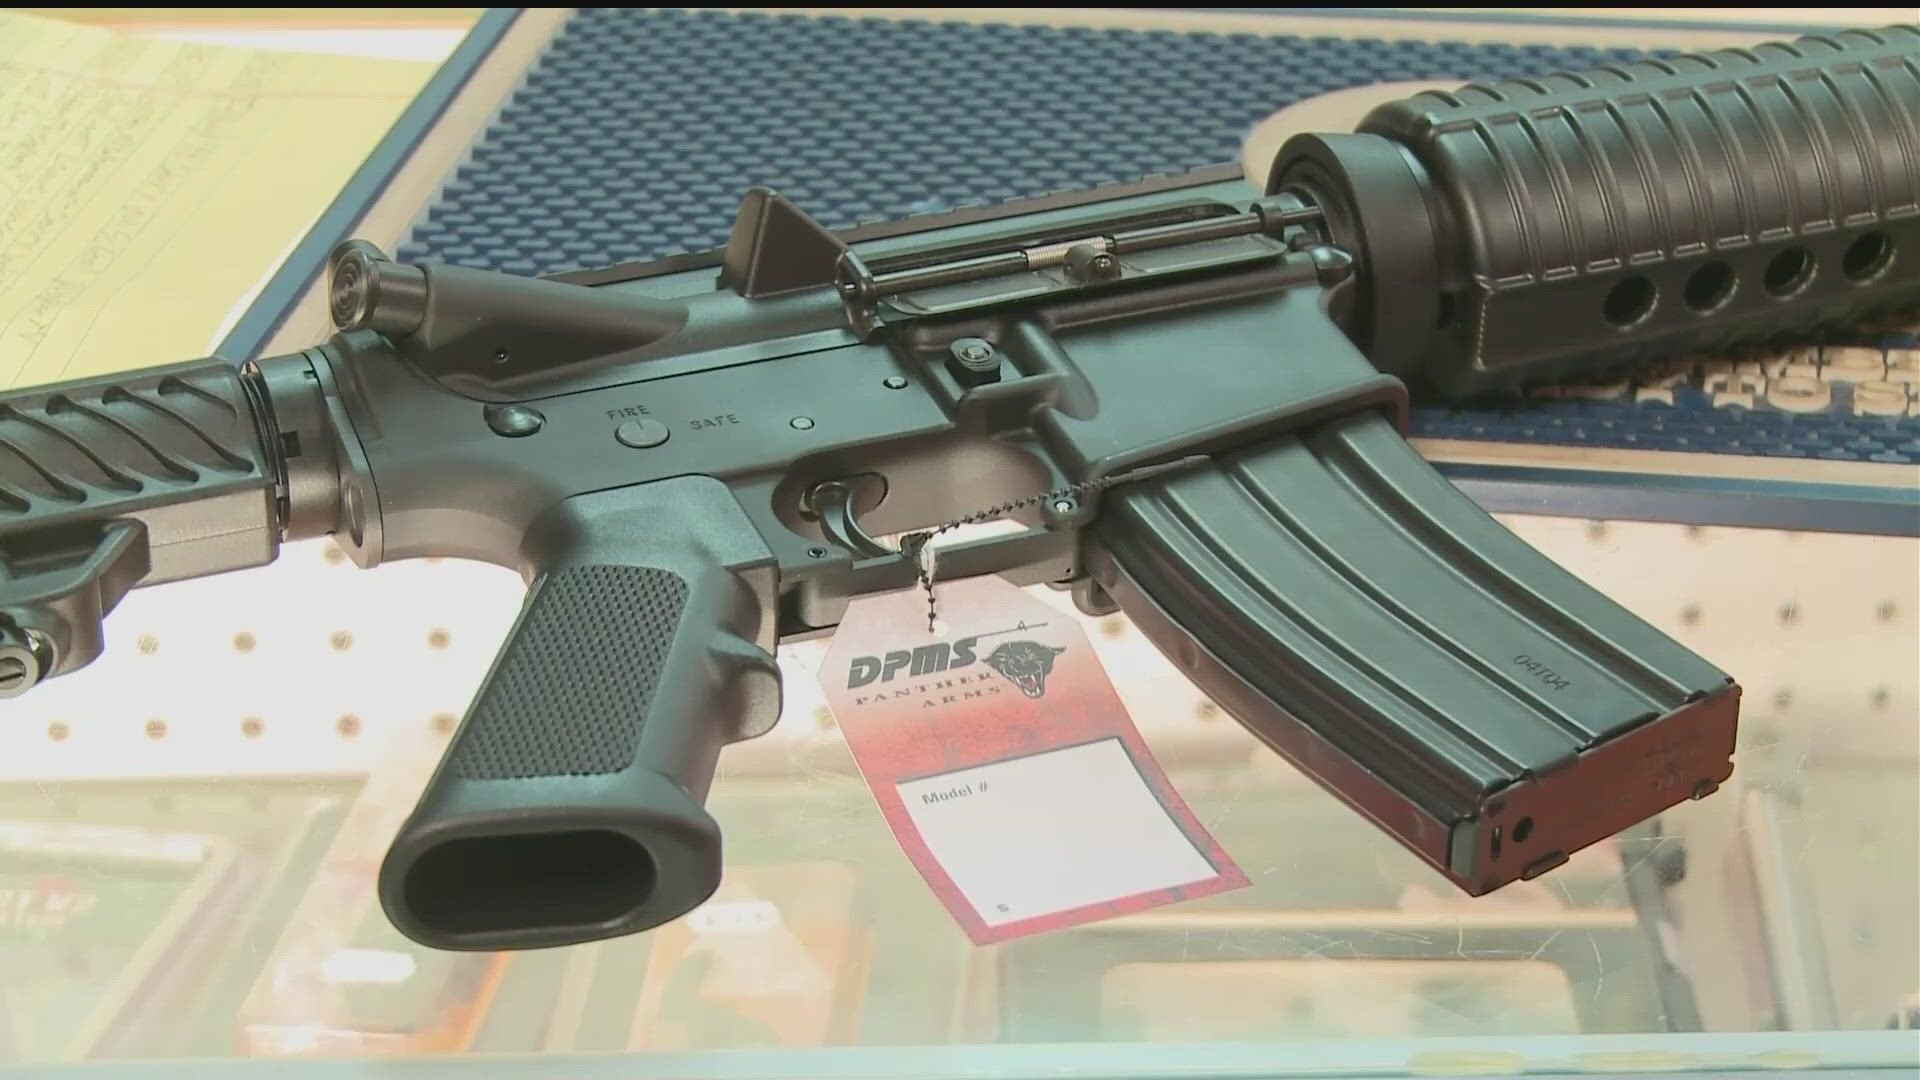 Four gun control bills were passed by a House committee Friday, including one requiring both gun dealers and individuals to perform background checks on buyers.